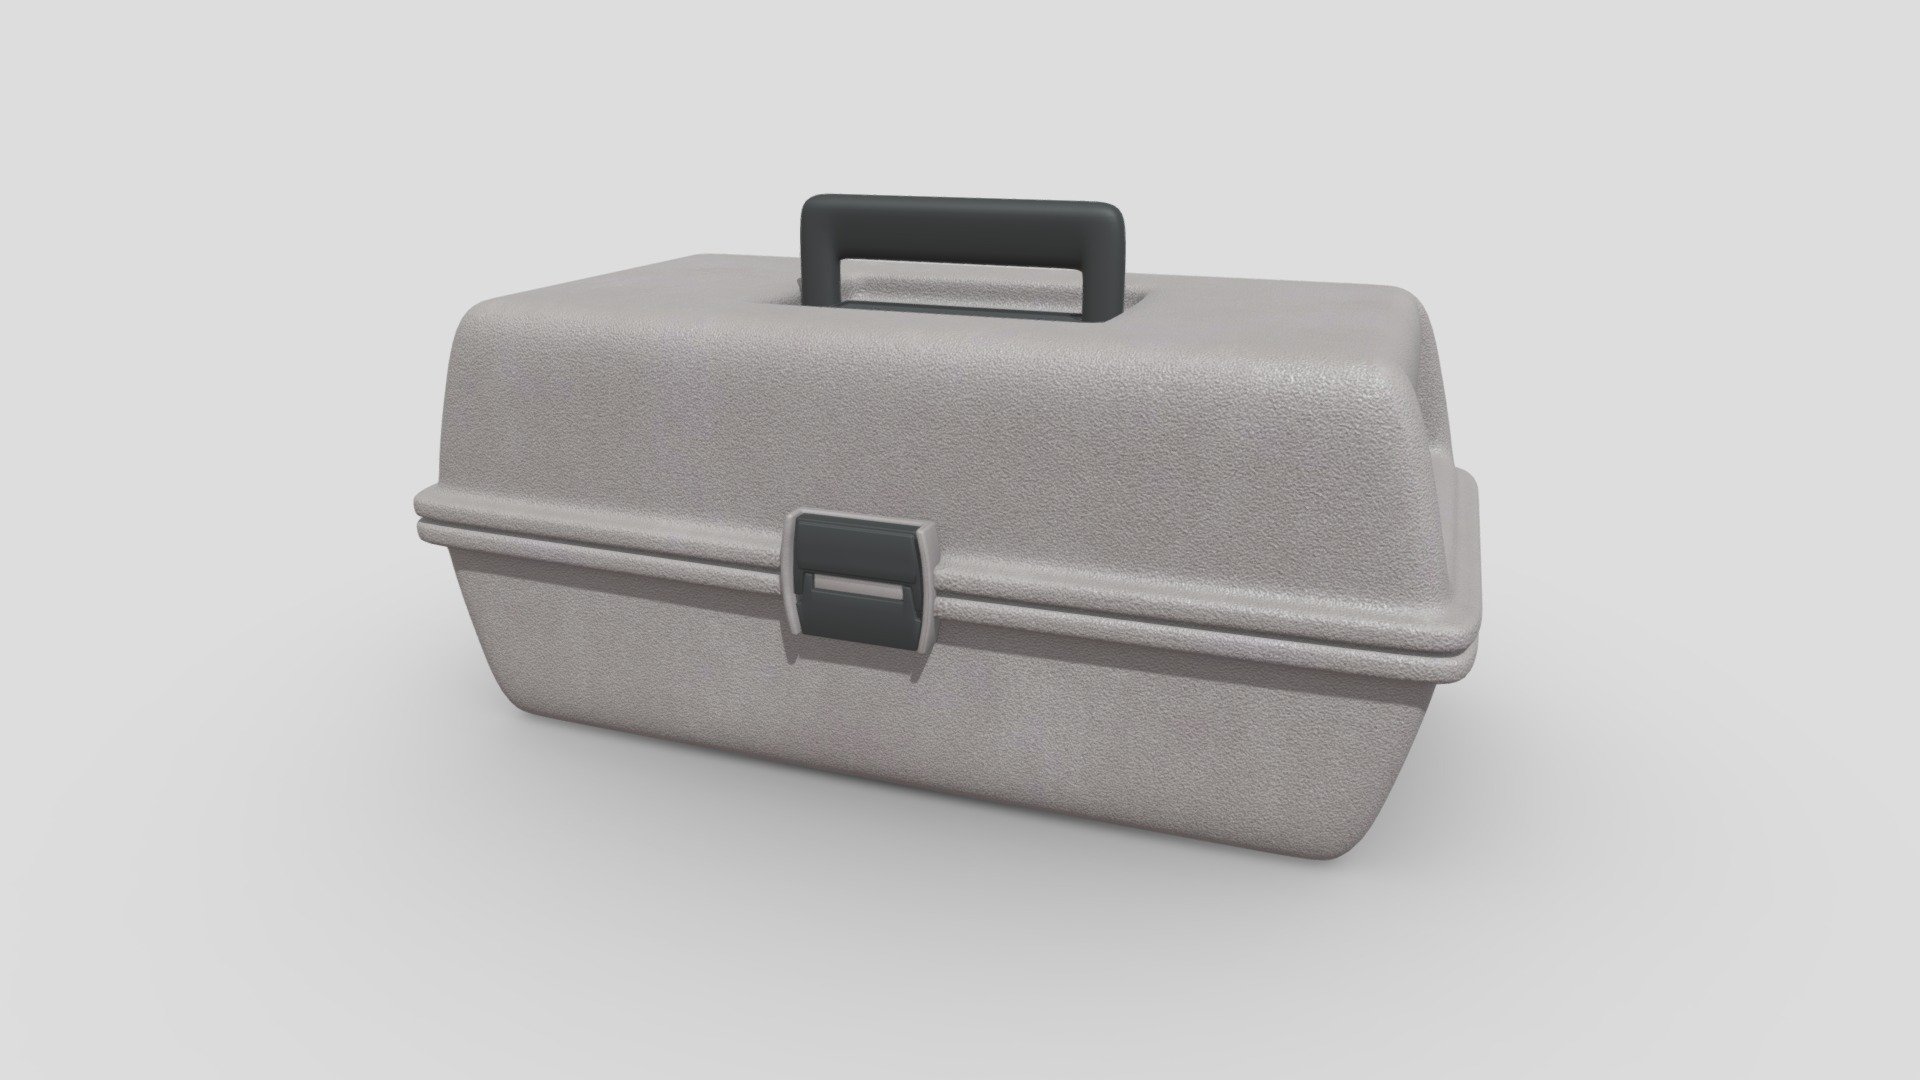 Simple Toolbox 3D model that I made using Blender. Two subdivision levels of the model are included. Both models have their own set of PBR textures and use a normal map to add extra detail. The high poly version (Subdivision Level 2) is shown in the model viewer.

Features:


Includes two subdivision levels of the model
Includes GLTF file type instructions
Models use the metalness workflow and 4K PBR textures in PNG format
Models have been manually UV unwrapped
Uses normal maps to add extra detail to the models
Blend file includes pre-applied textures as well as camera and lighting setups
Lighting provided by included HDRi map downloaded from HDRi Haven
Model has been exported in 4 file formats (FBX, OBJ, GLTF/GLB, DAE/Collada)

Included Textures:


AO, Diffuse, Roughness, Gloss, Metallic, Normal
UVLayout

The source file is uploaded in FBX format and is used for demonstration. In the additional file you will find all model exports and the textures that go along with them 3d model